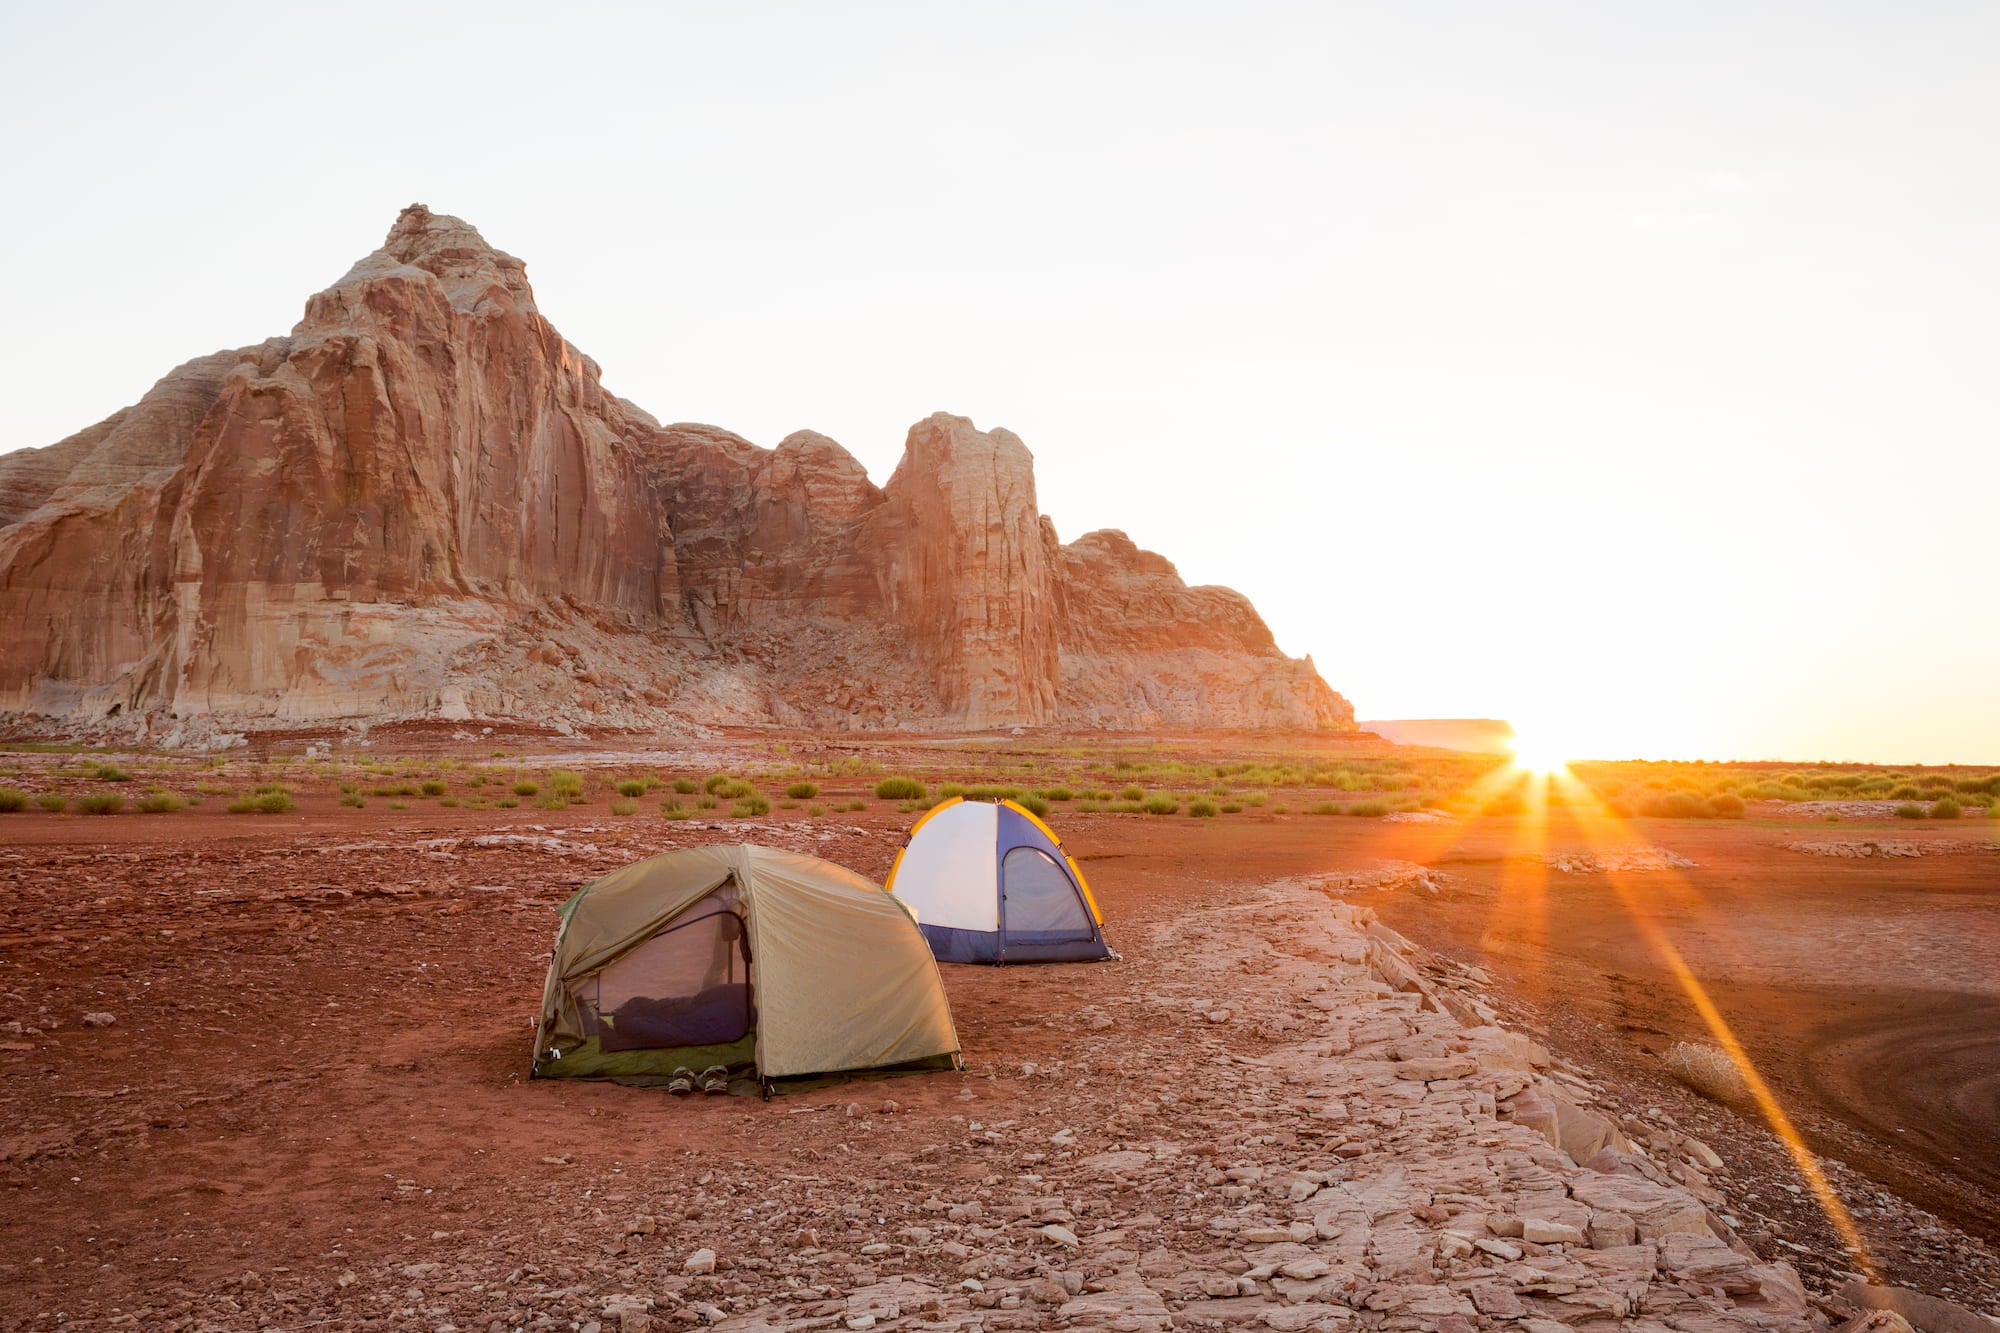 Tents in the desert of Arizona at sunset.